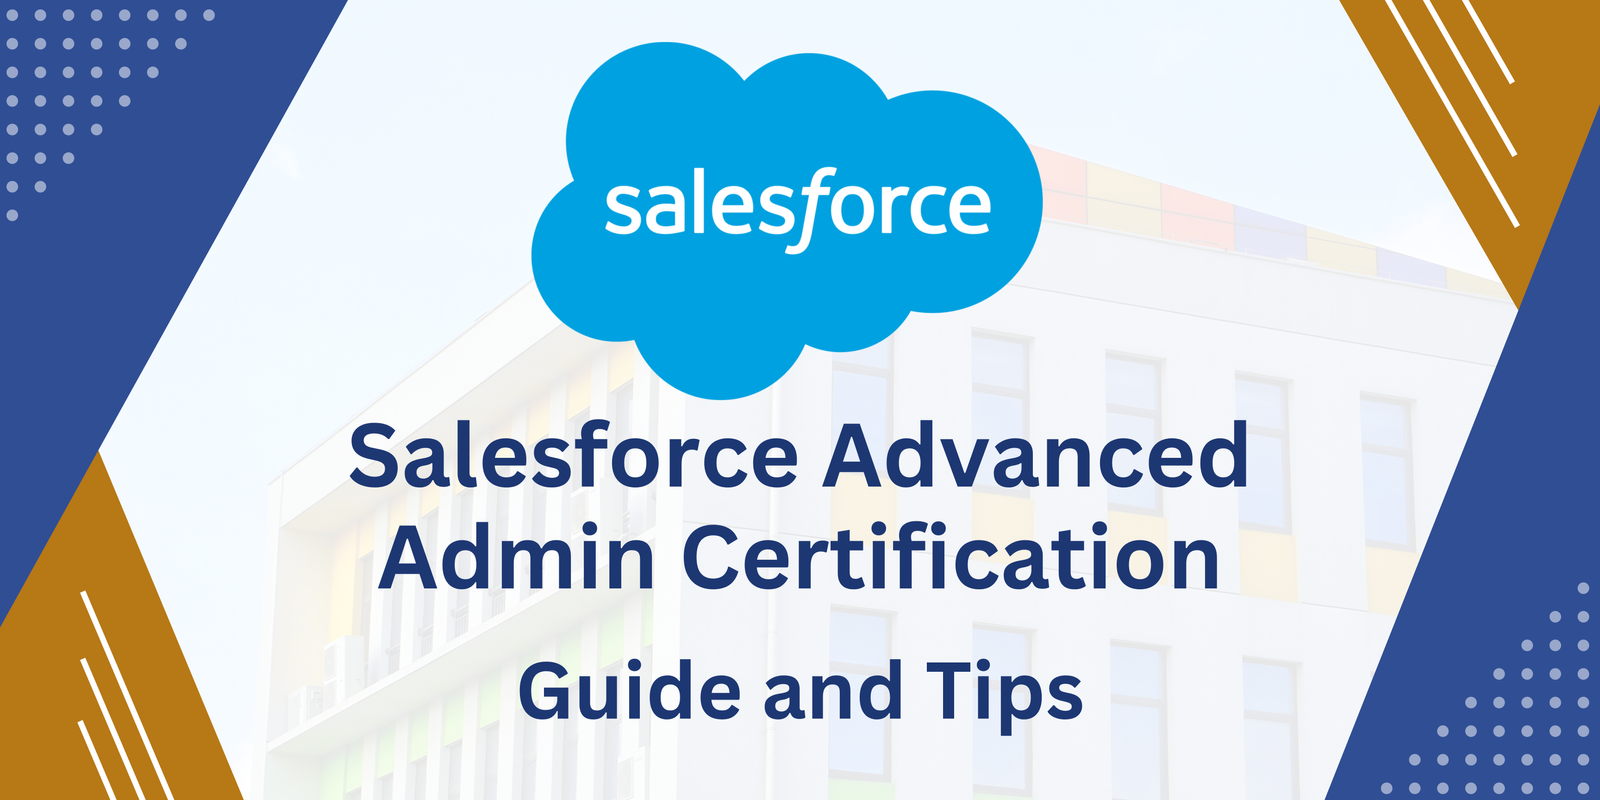 Salesforce Advanced Admin Certification Guide and Tips